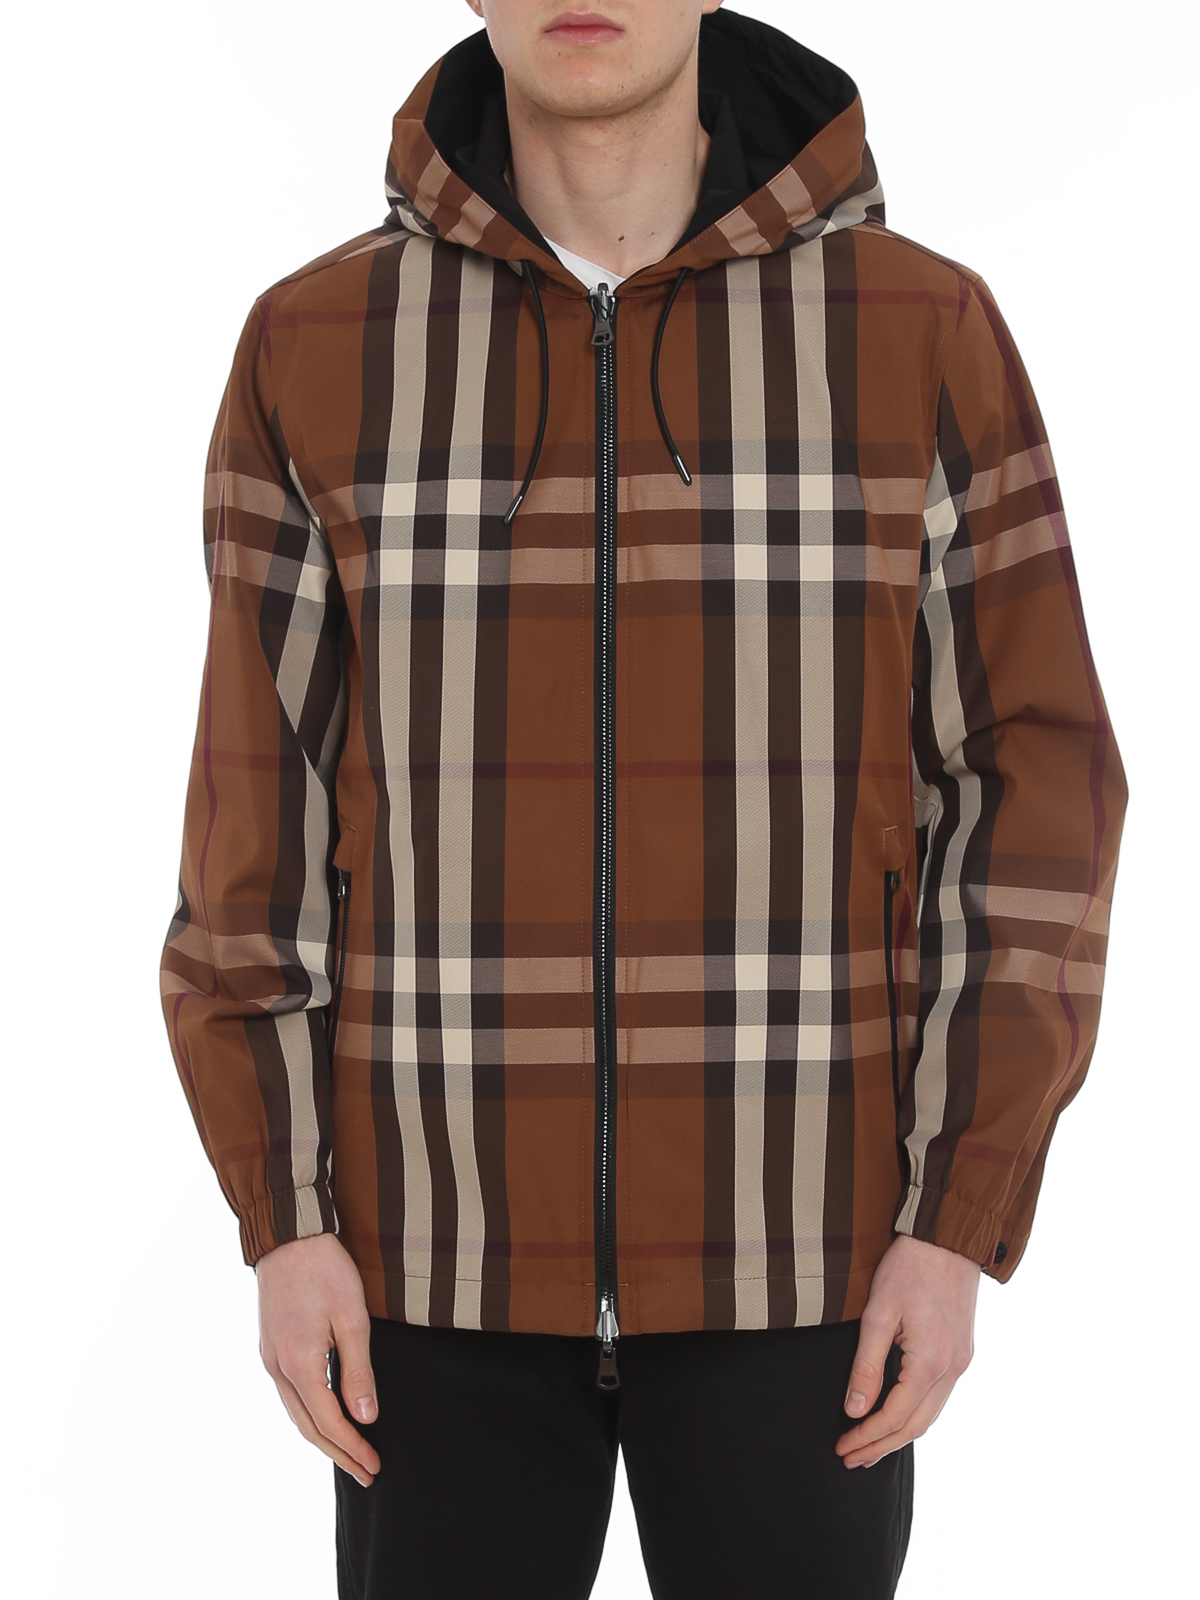 Casual jackets Burberry - Stretton reversible jacket - 8036916 